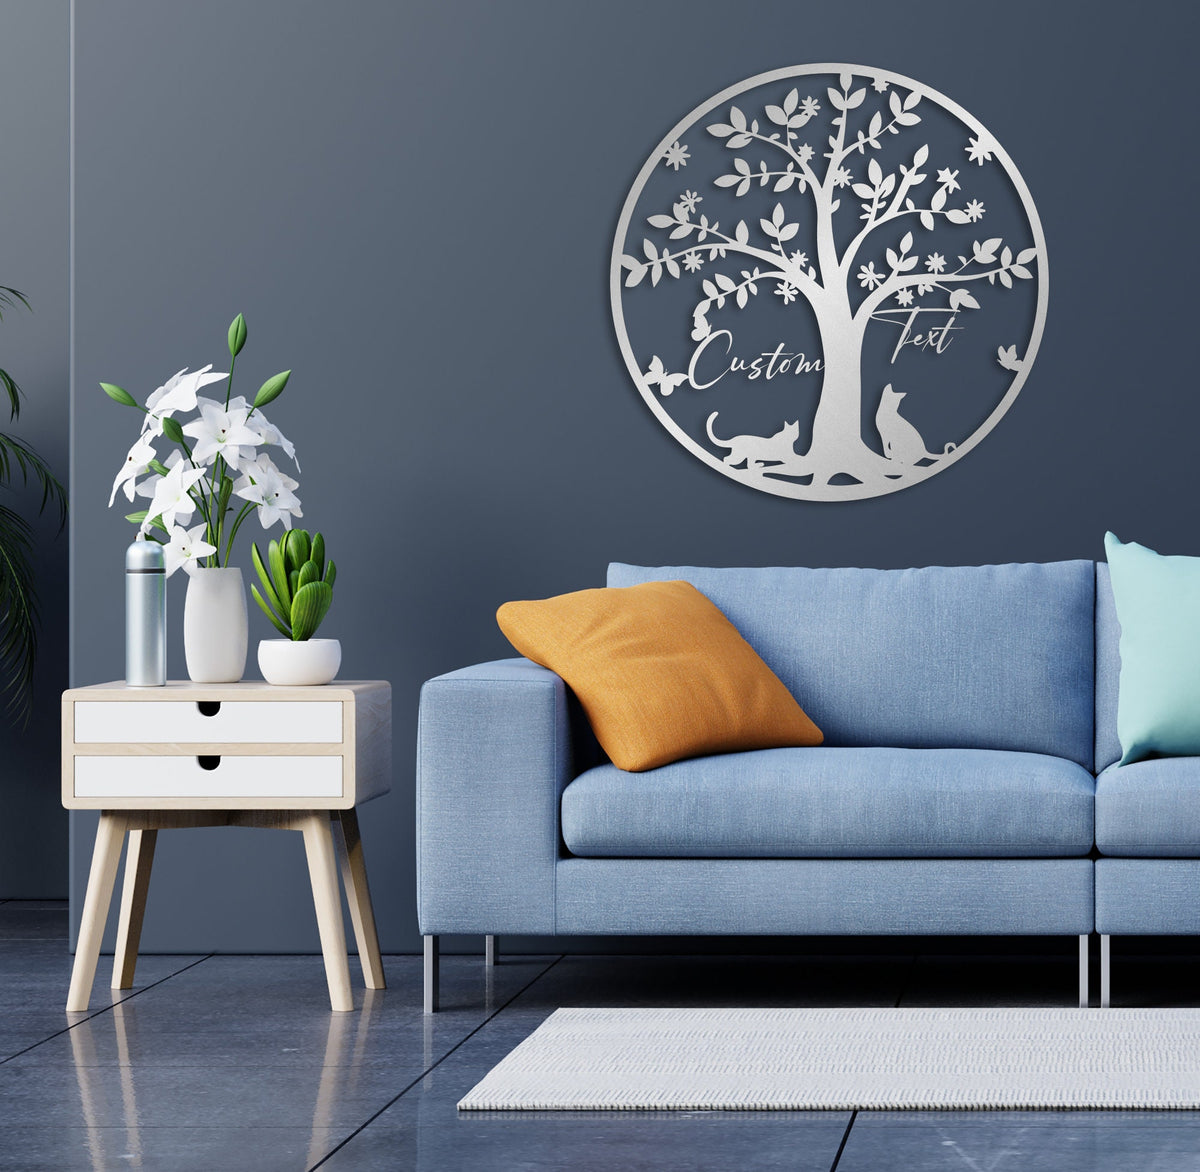 Cats and Tree Customized Metal Wall Art